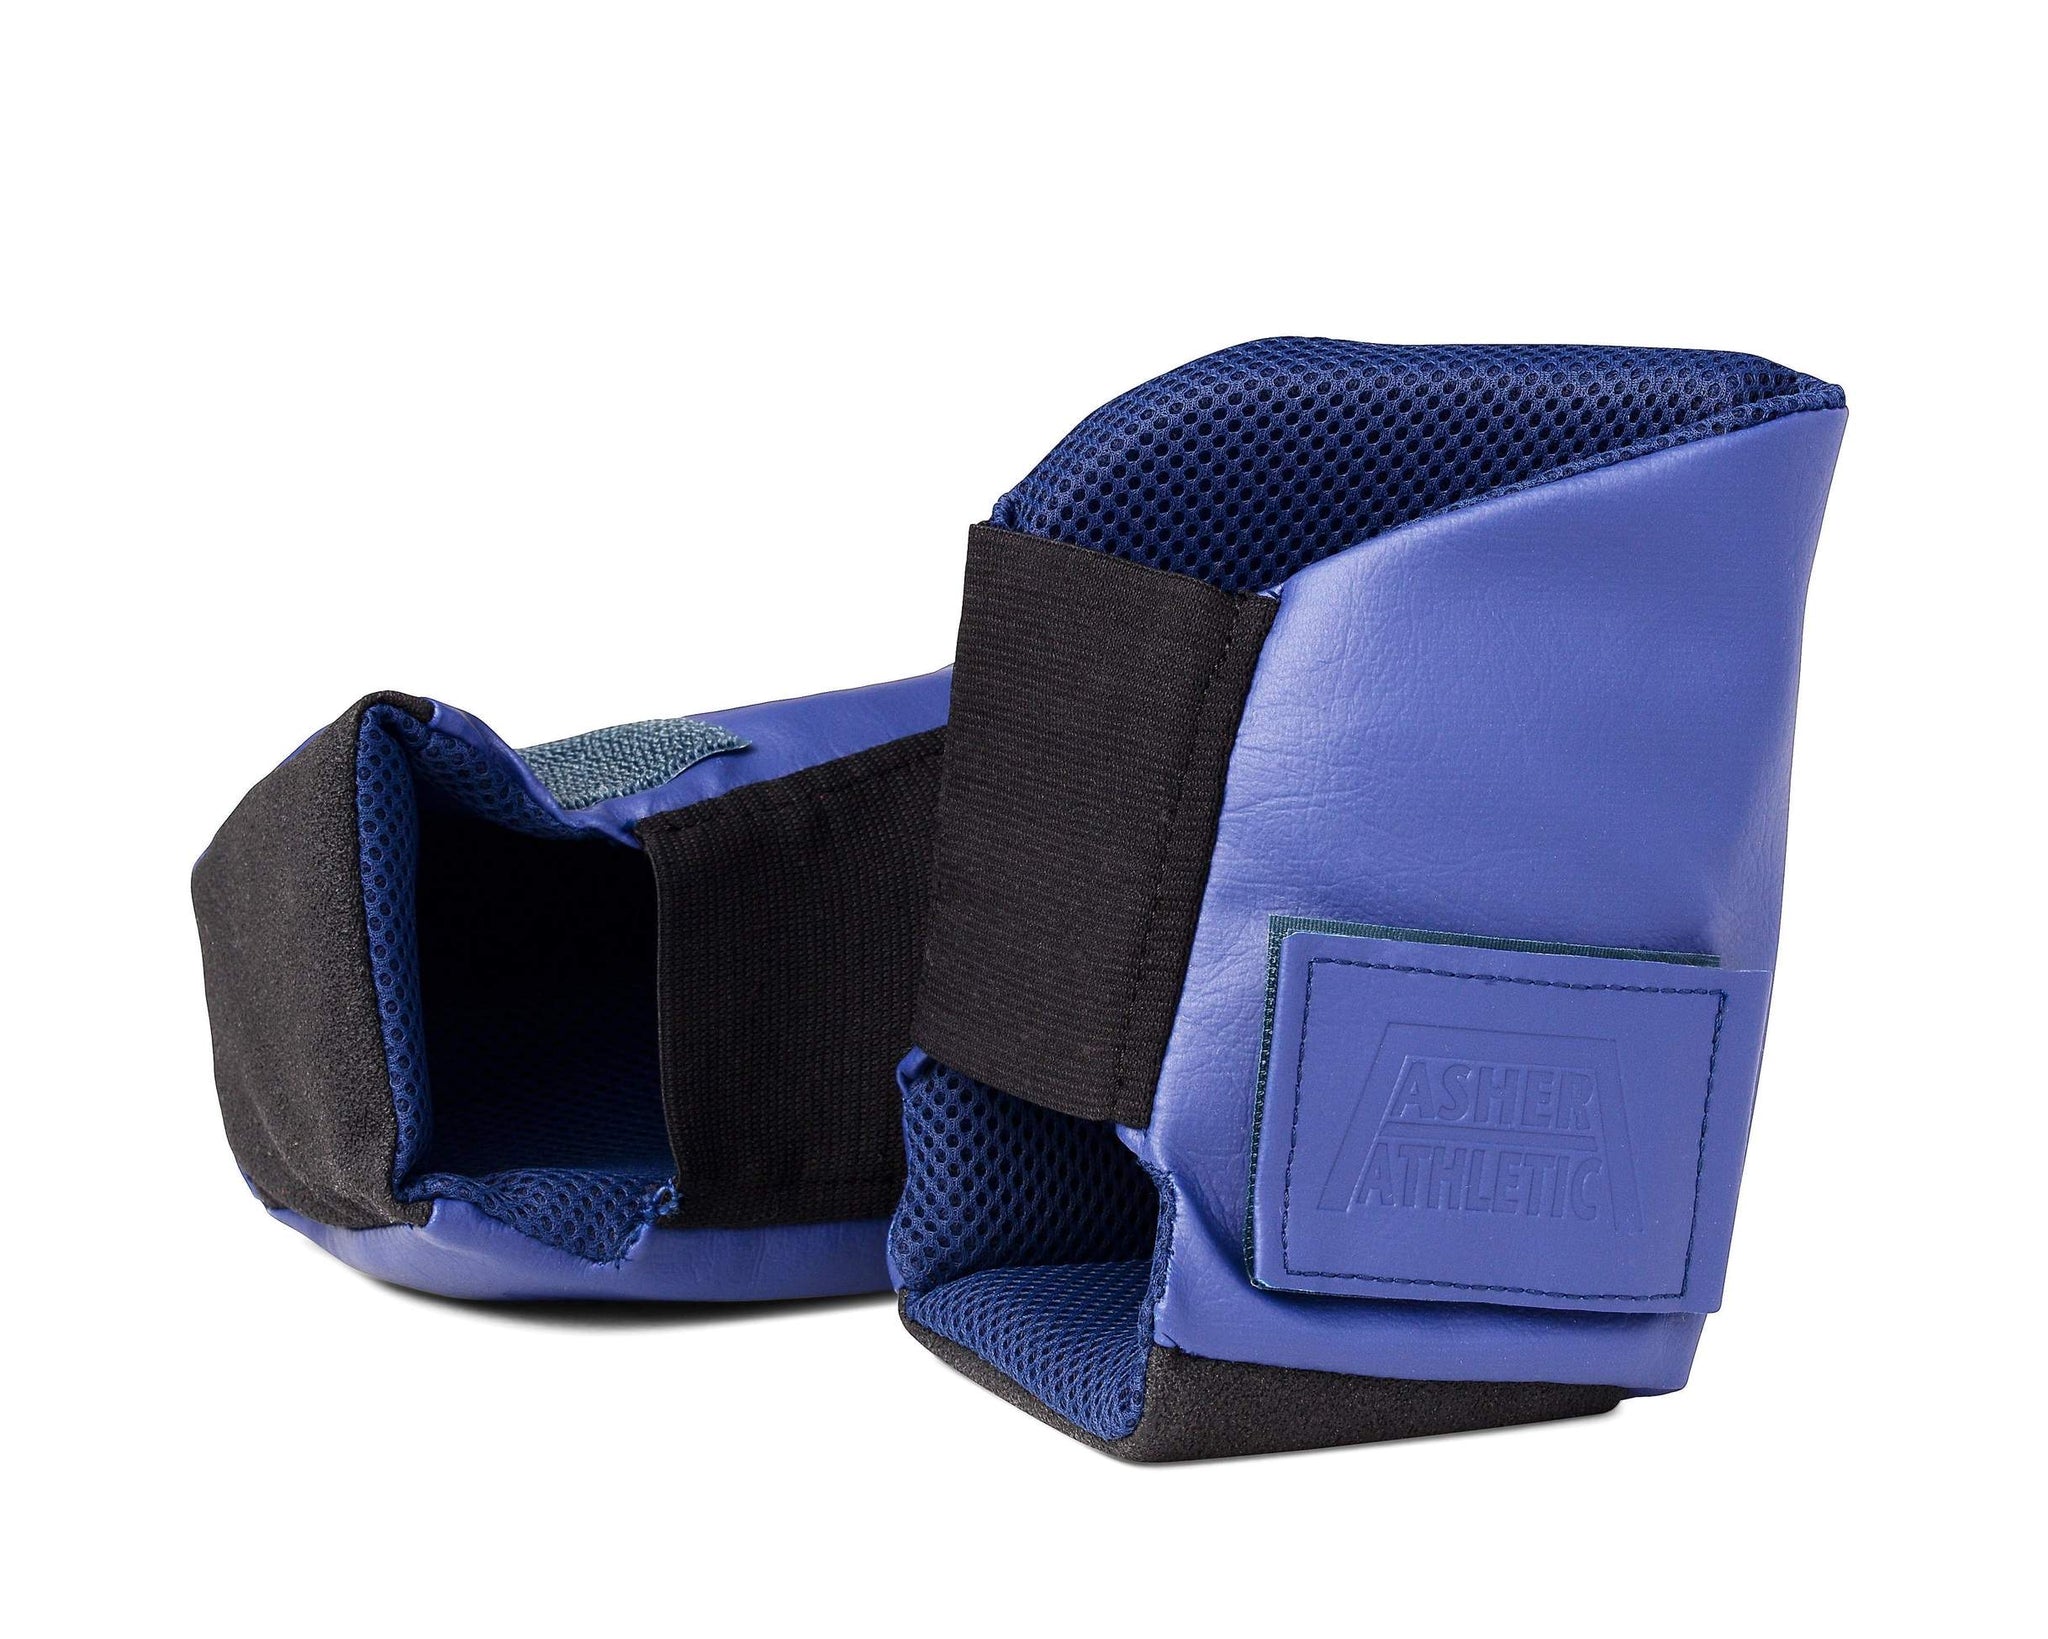 The Asher Athletic Bar Heel Pad is for 